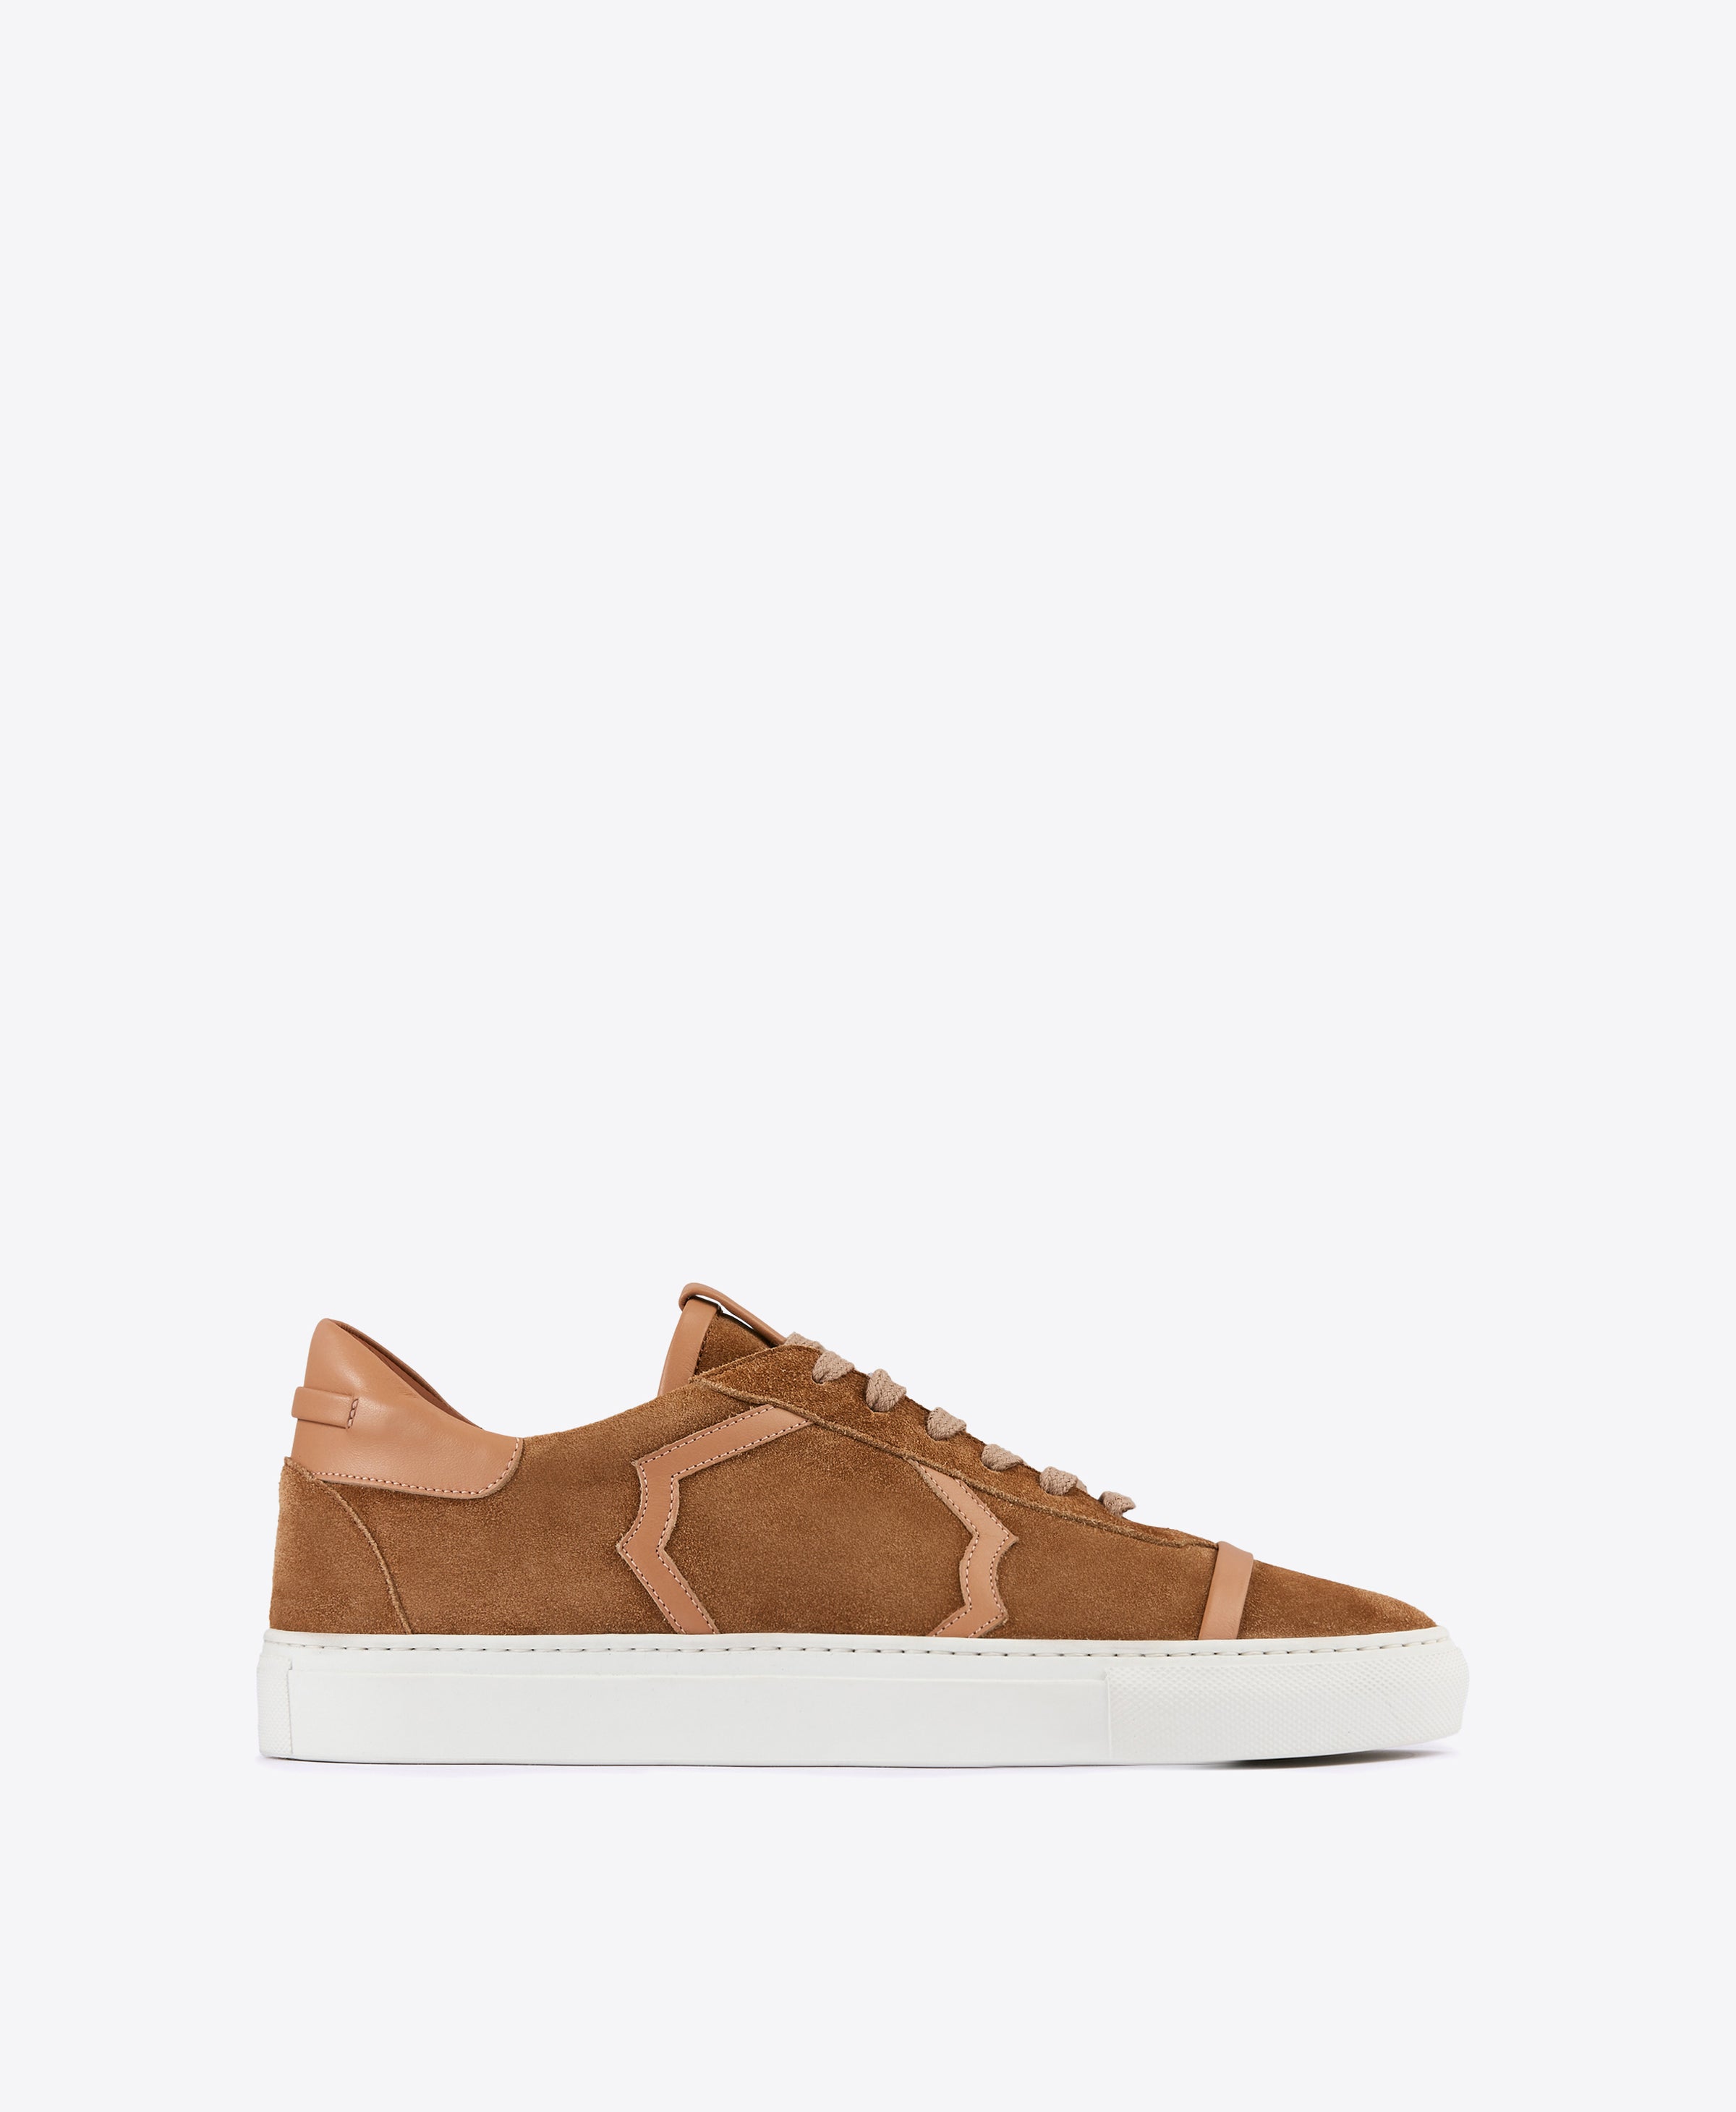 Louis Vuitton Suede Leather Trim Embellishment Sneakers It 36.5 | 6.5